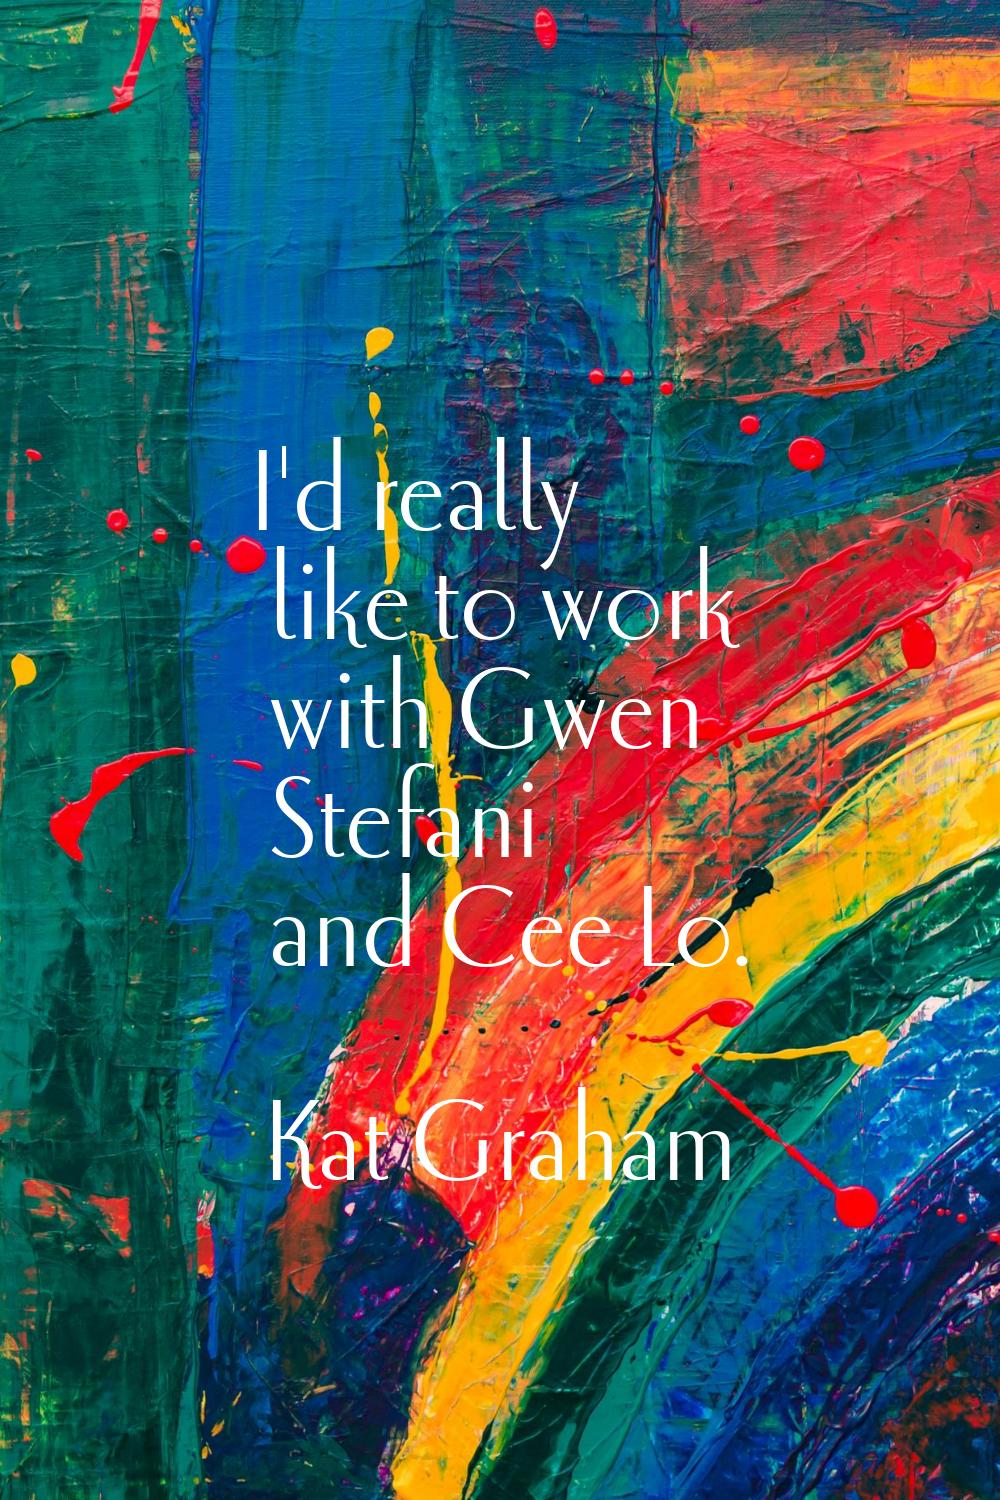 I'd really like to work with Gwen Stefani and Cee Lo.